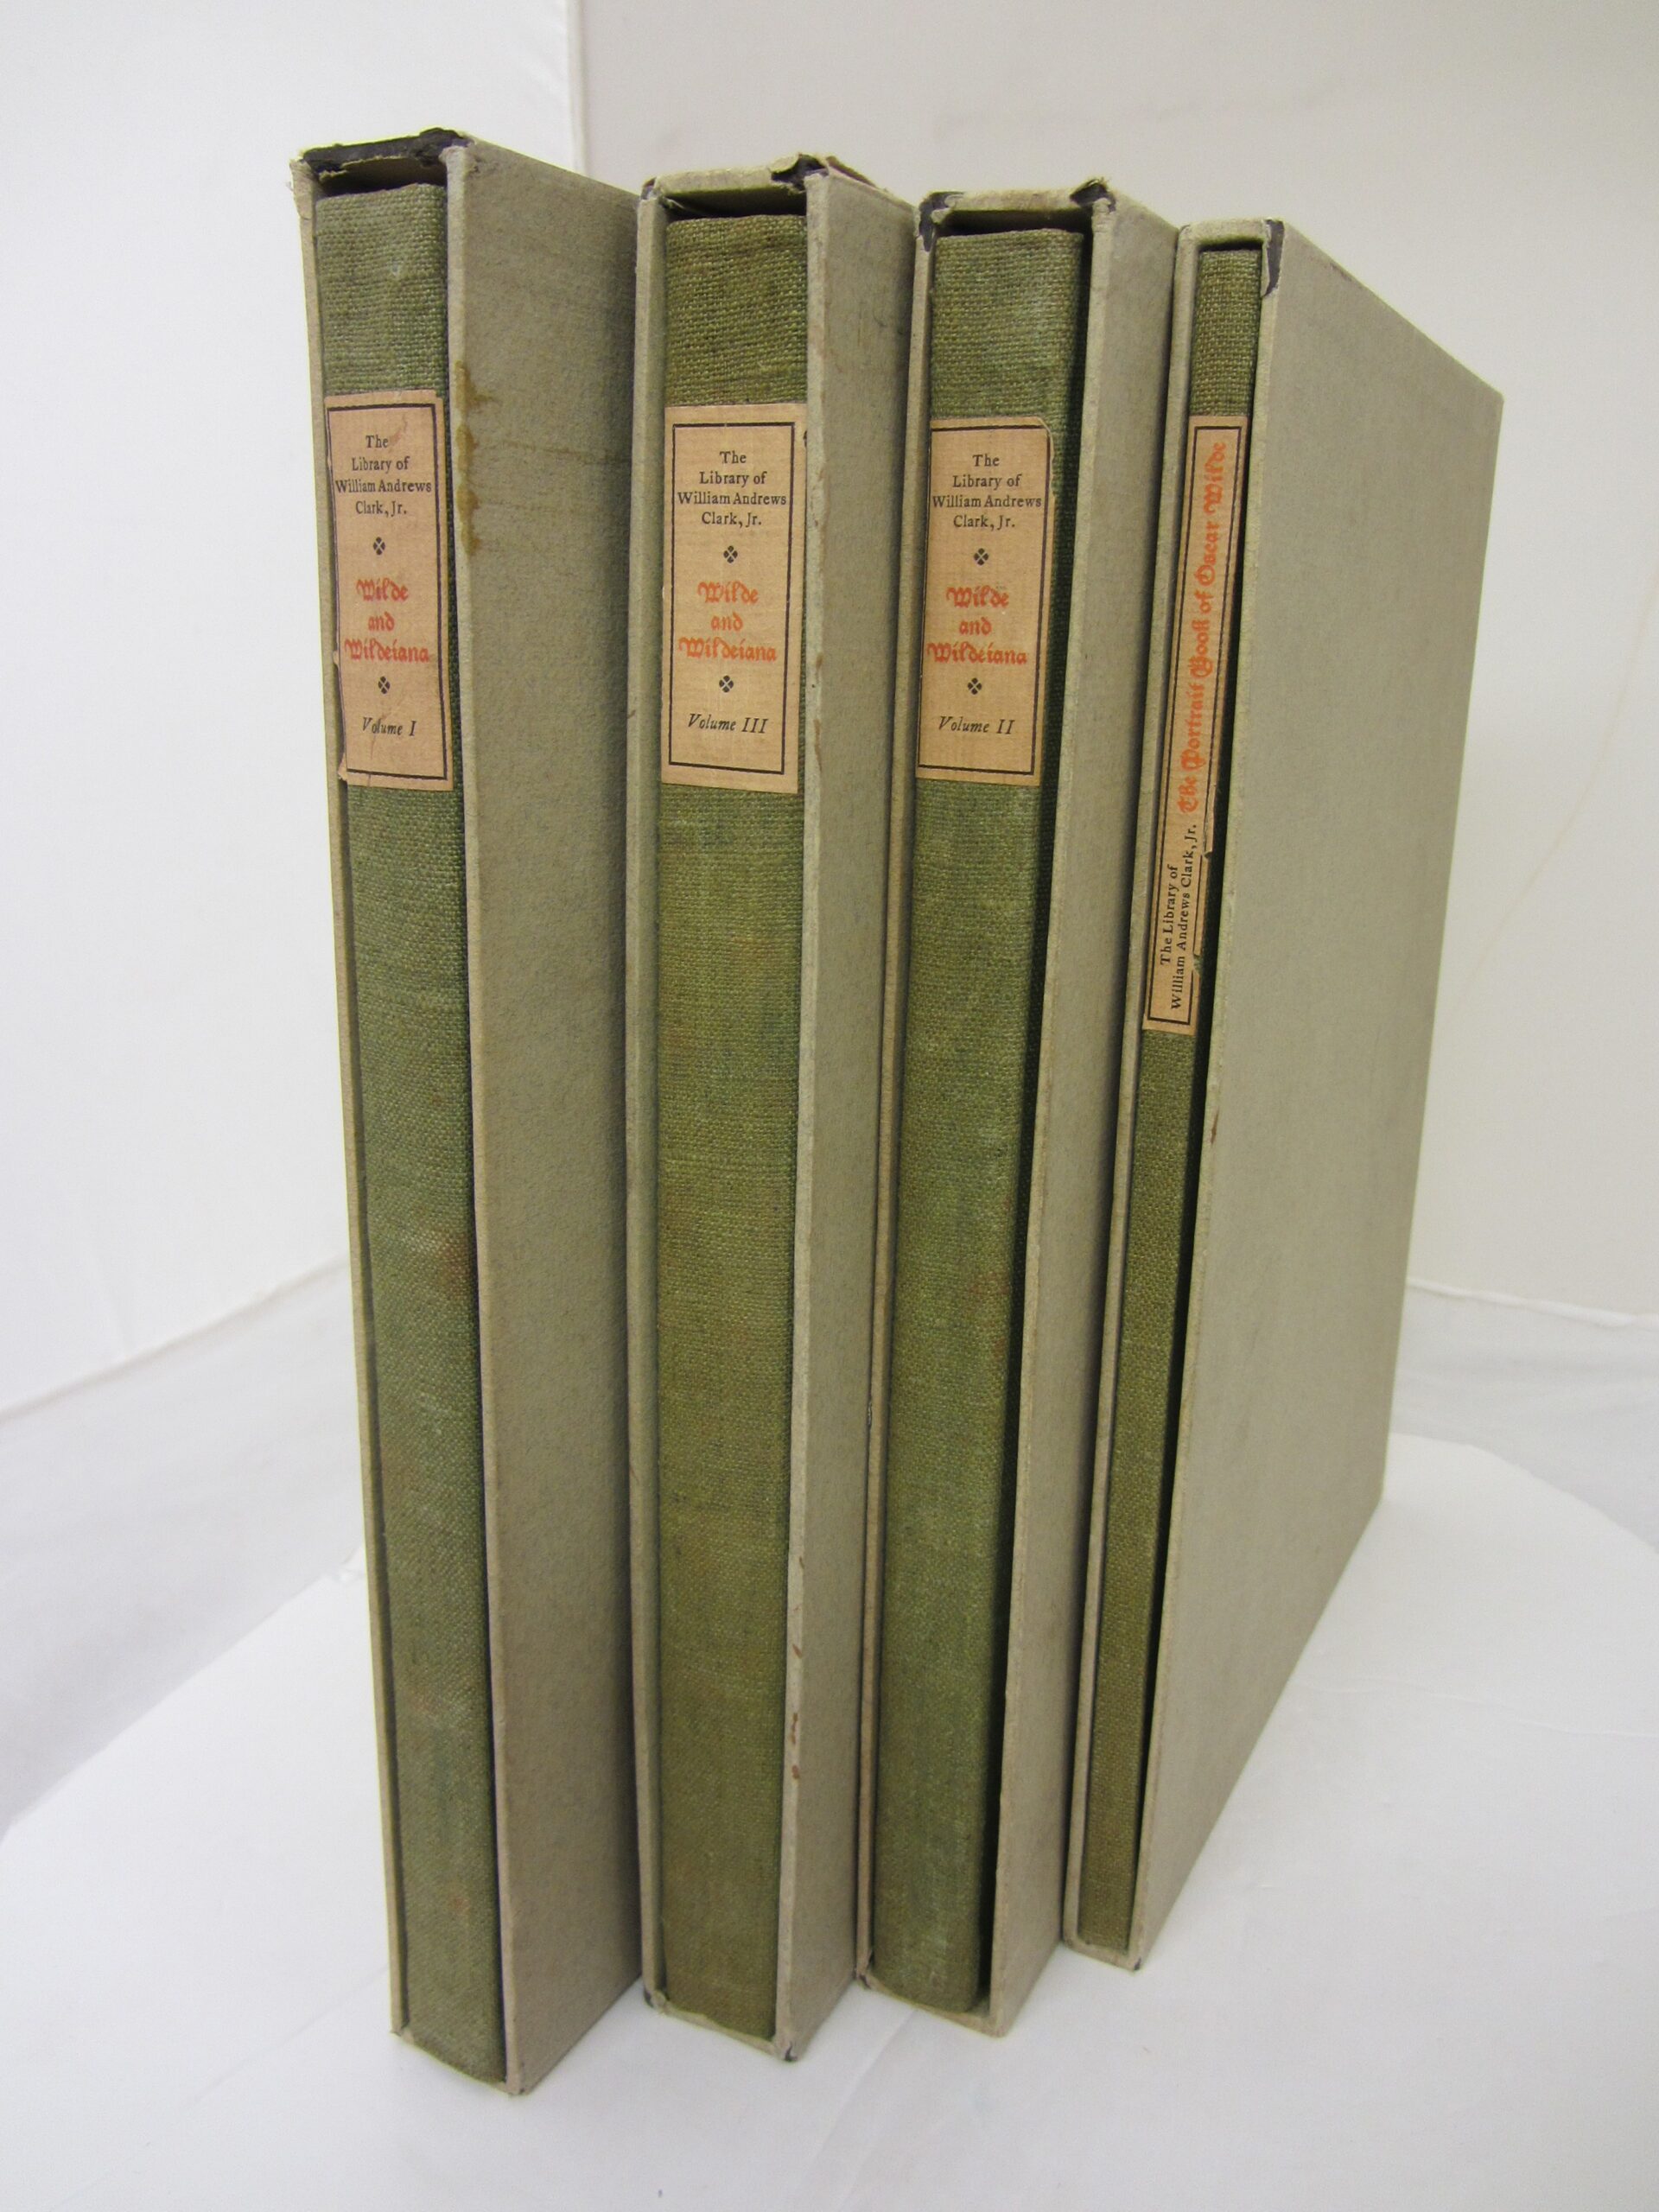 Wilde and Wildeiana. Four Volumes Limited Edition Set by Oscar Wilde